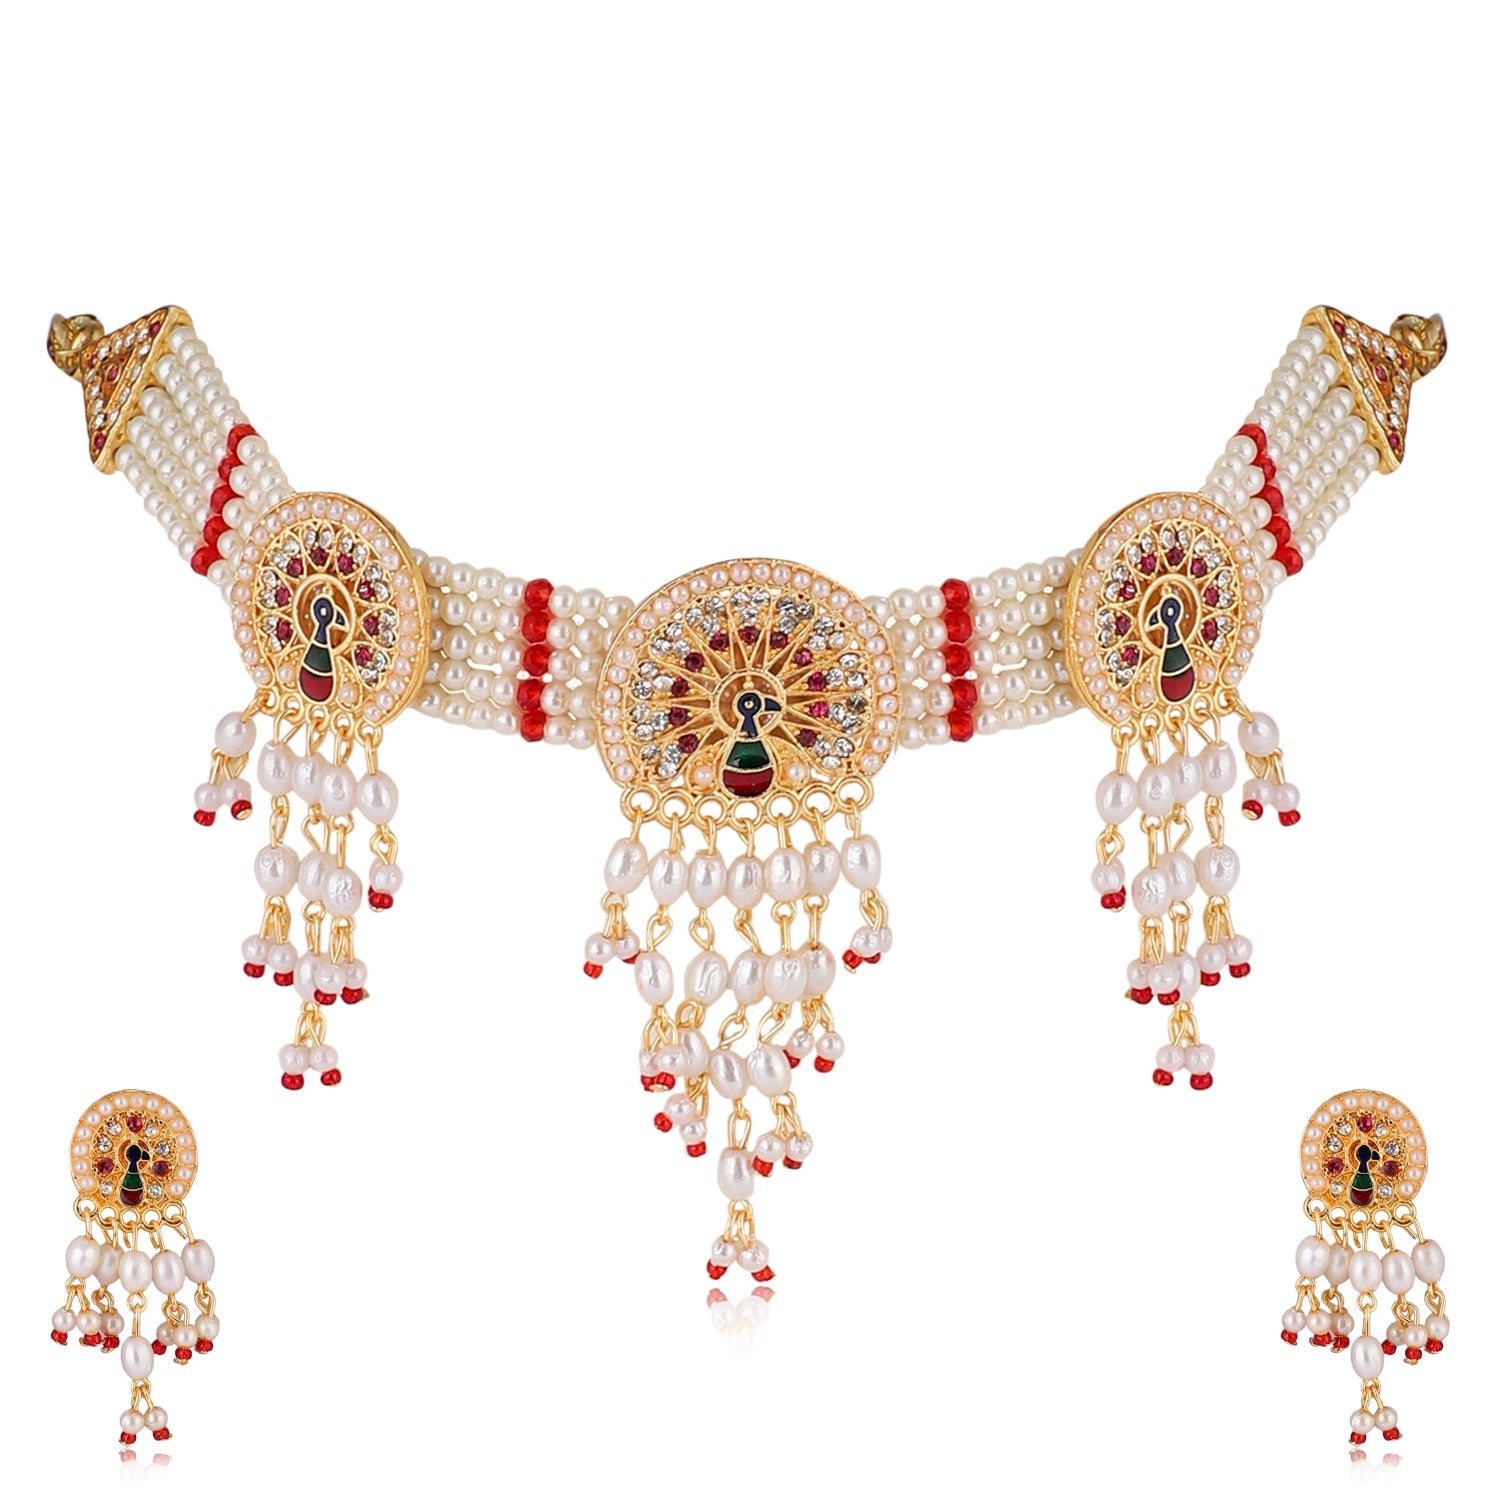 Mekkna Women's Pride Choker Necklace with Earrings | Buy This Necklace Online from Mekkna